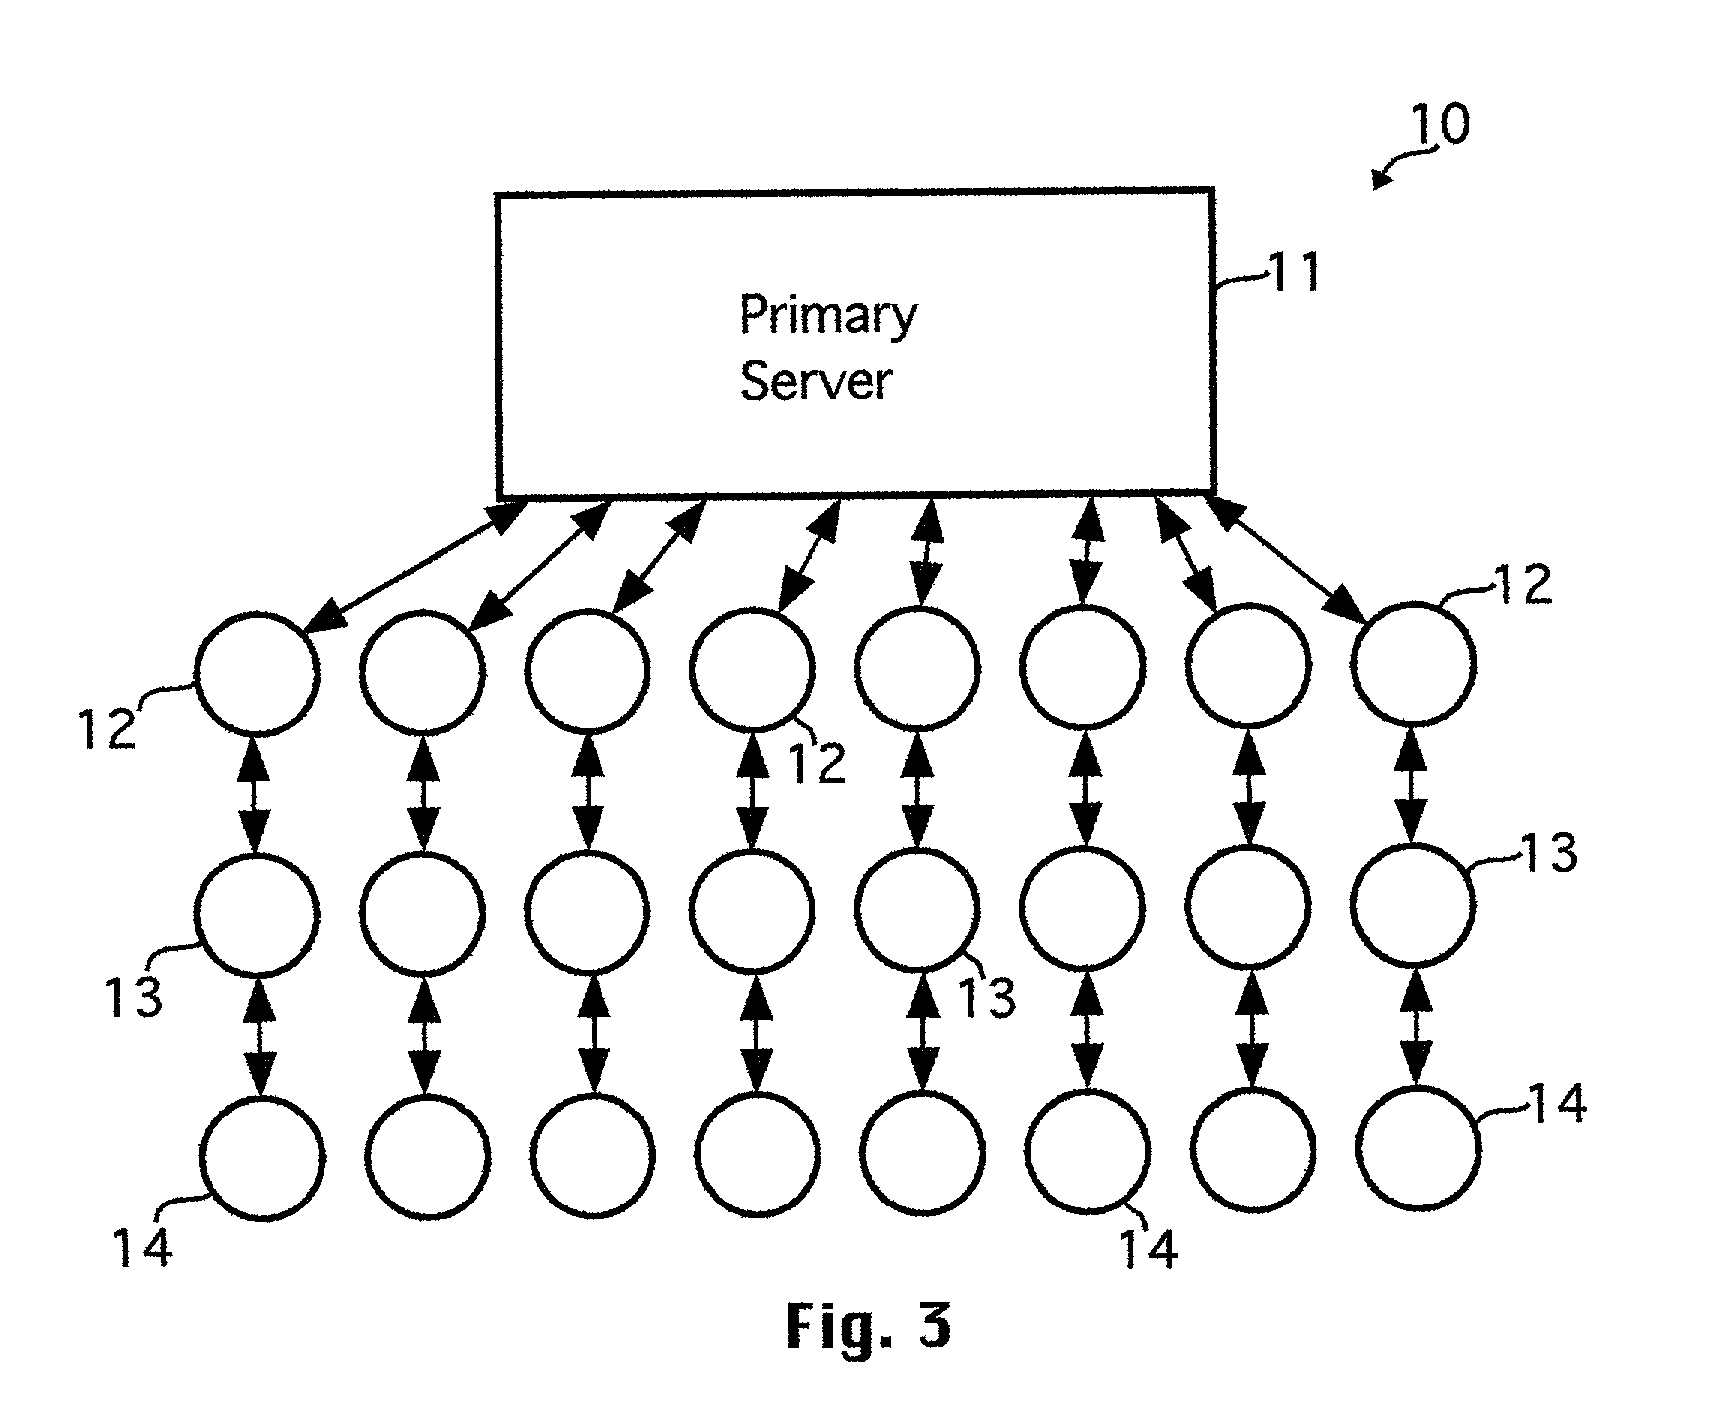 System of distributing content data over a computer network and method of arranging nodes for distribution of data over a computer network